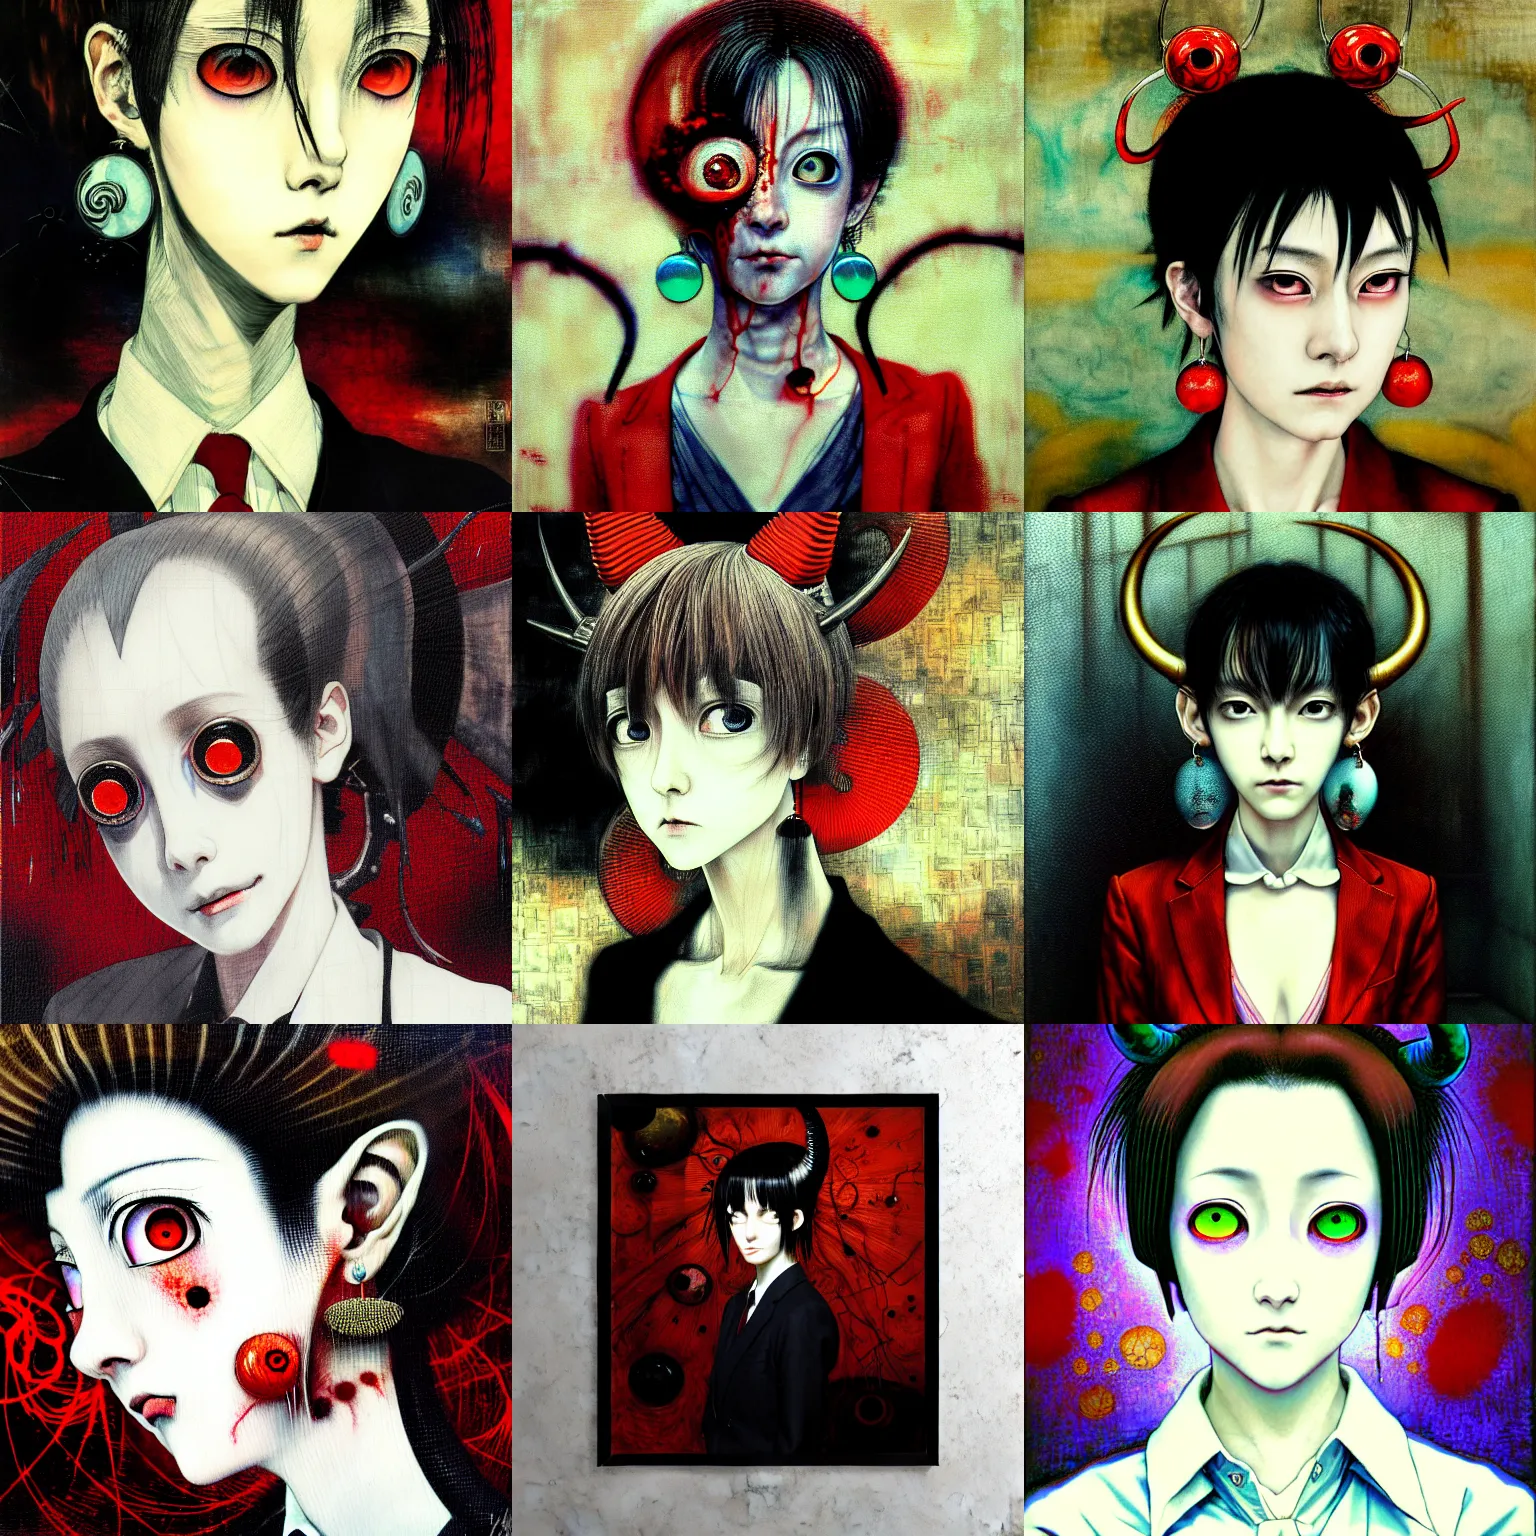 Prompt: yoshitaka amano blurred and dreamy realistic three quarter angle horror portrait of a sinister young woman with short hair, big earrings, horns and red eyes wearing office suit with tie, junji ito abstract patterns in the background, satoshi kon anime, noisy film grain effect, highly detailed, renaissance oil painting, weird portrait angle, blurred lost edges